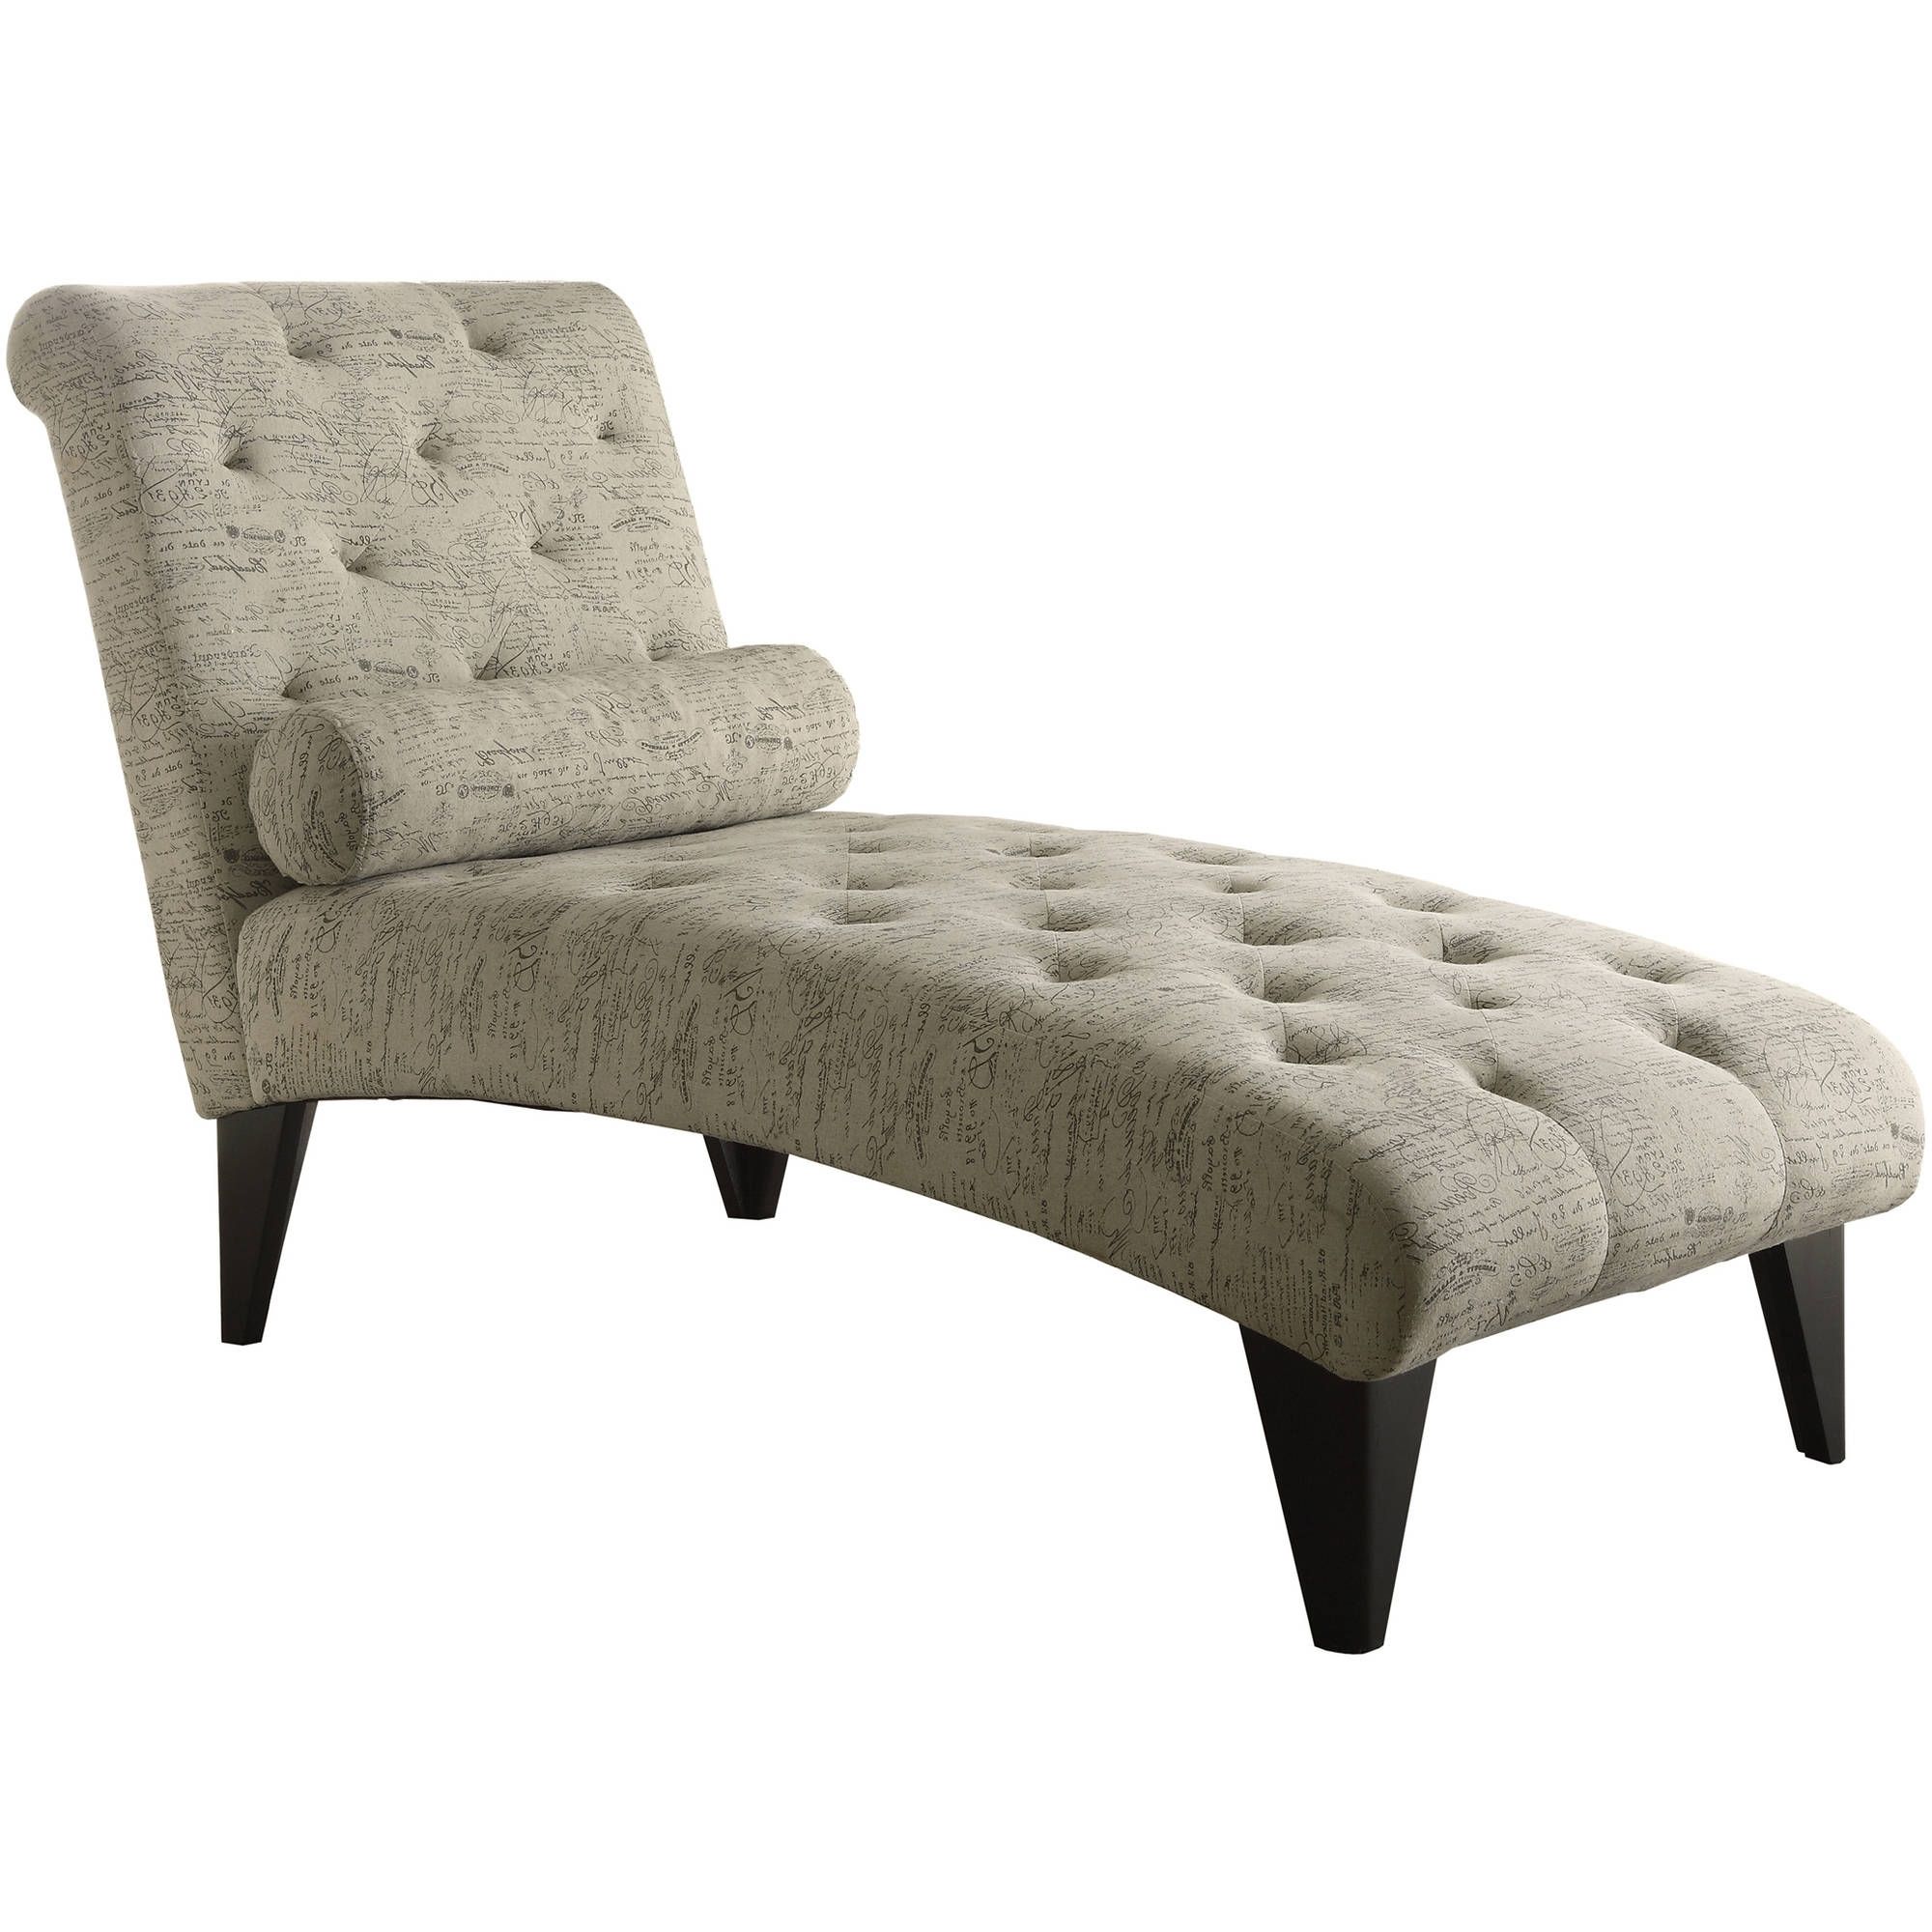 Popular Sofa Lounge Chairs With Regard To Chaise Lounges – Walmart (View 2 of 20)